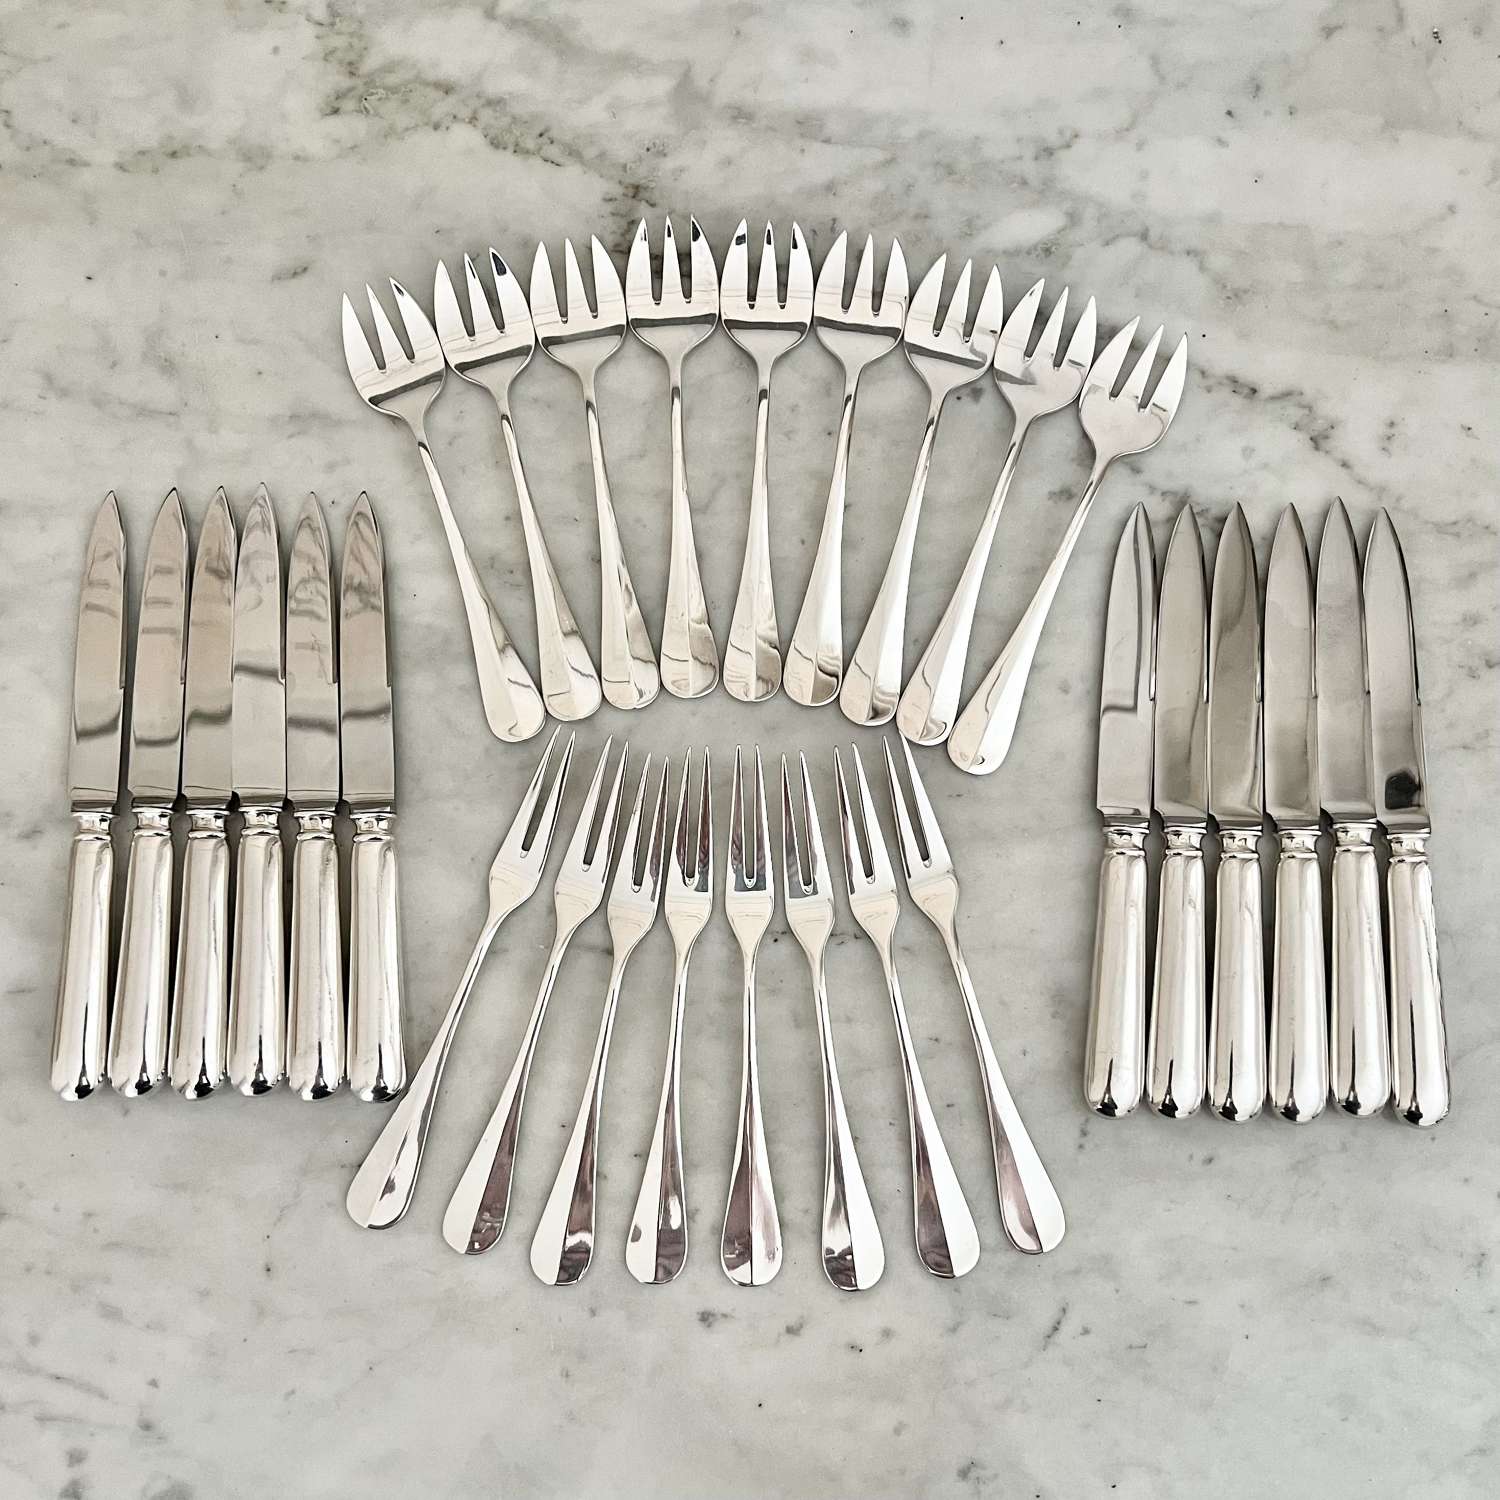 Shellfish & Lobster Cutlery For 12 guests By Wiskemann